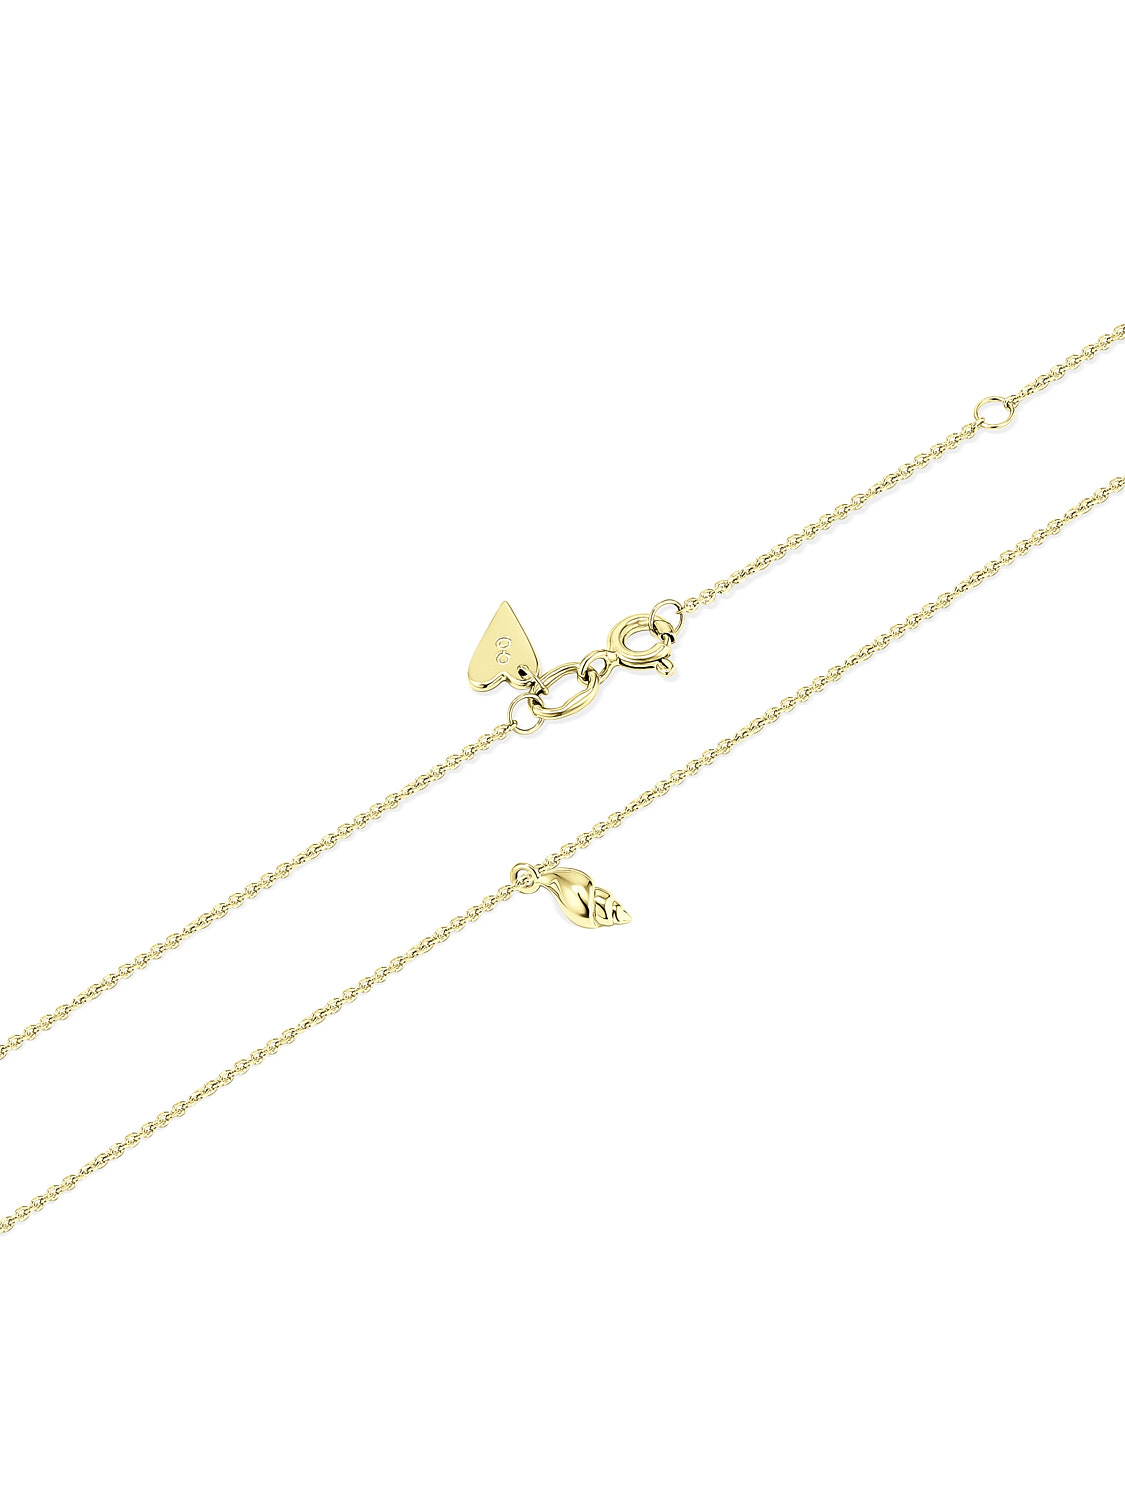 TULIP SHELL NECKLACE YELLOW GOLD  